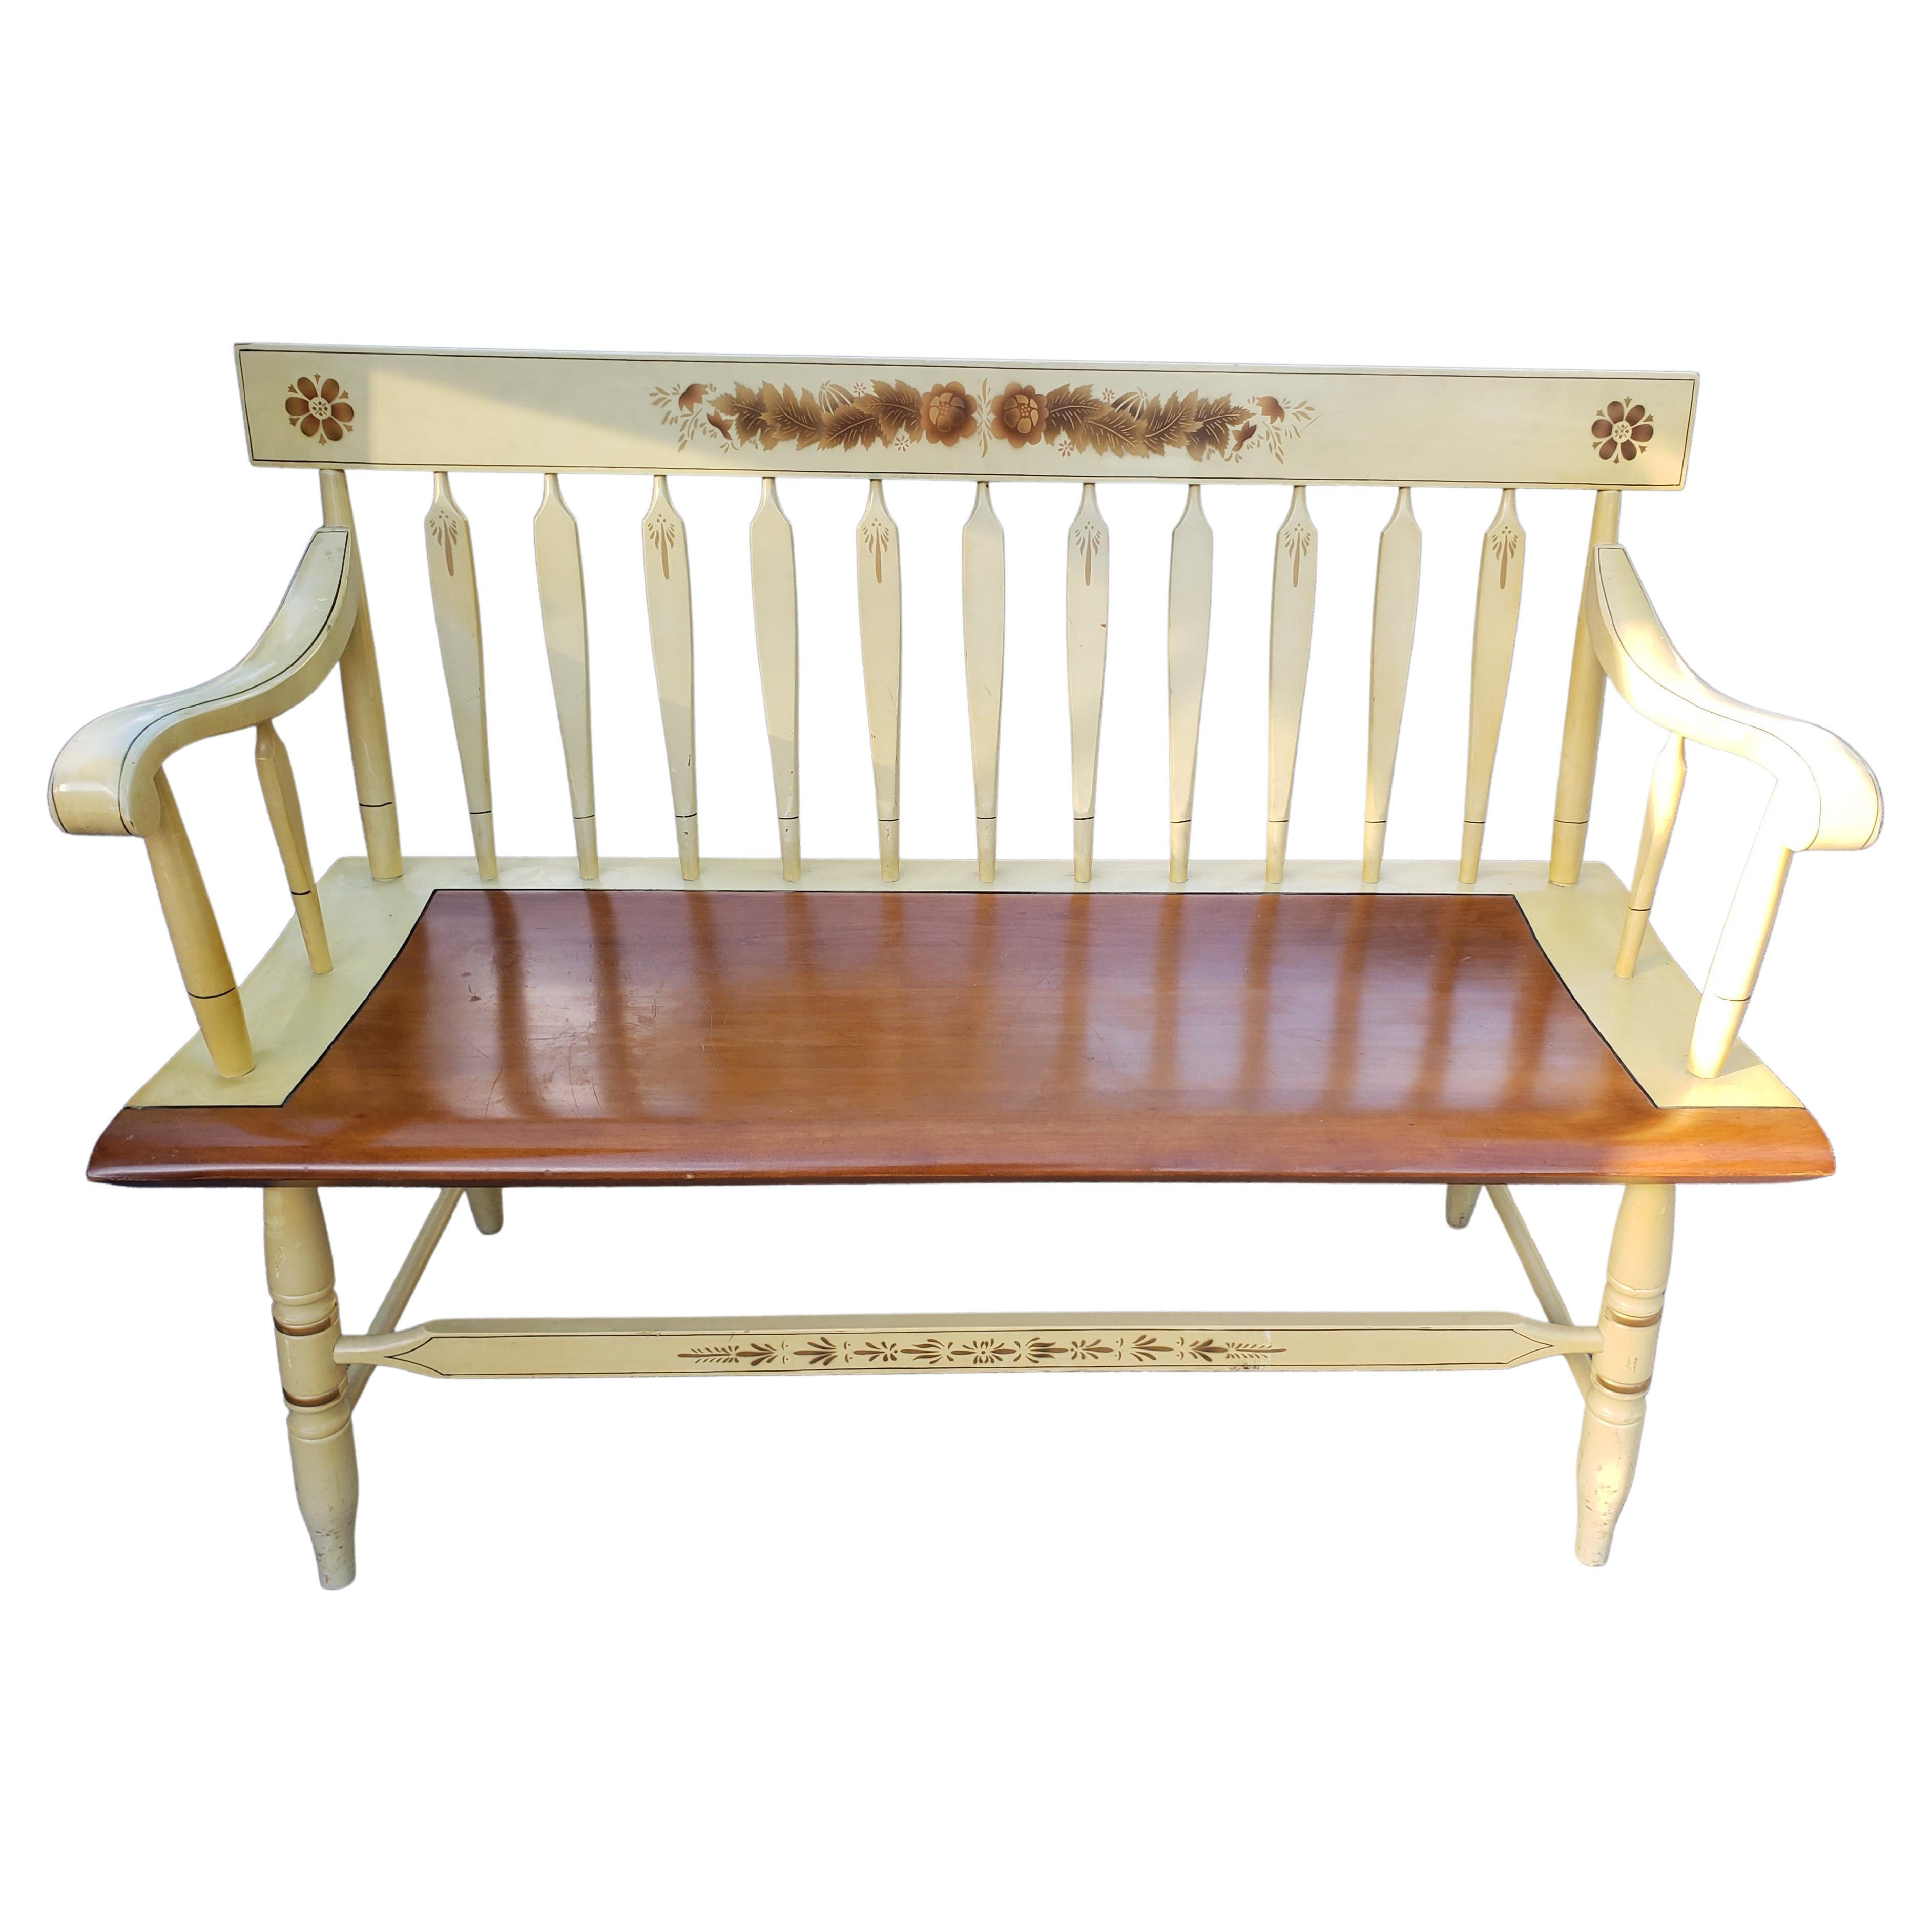 Hitchcock Painted and Decorated Maple Two-Seater Settee or bench in great vintage condition.
Measures 45